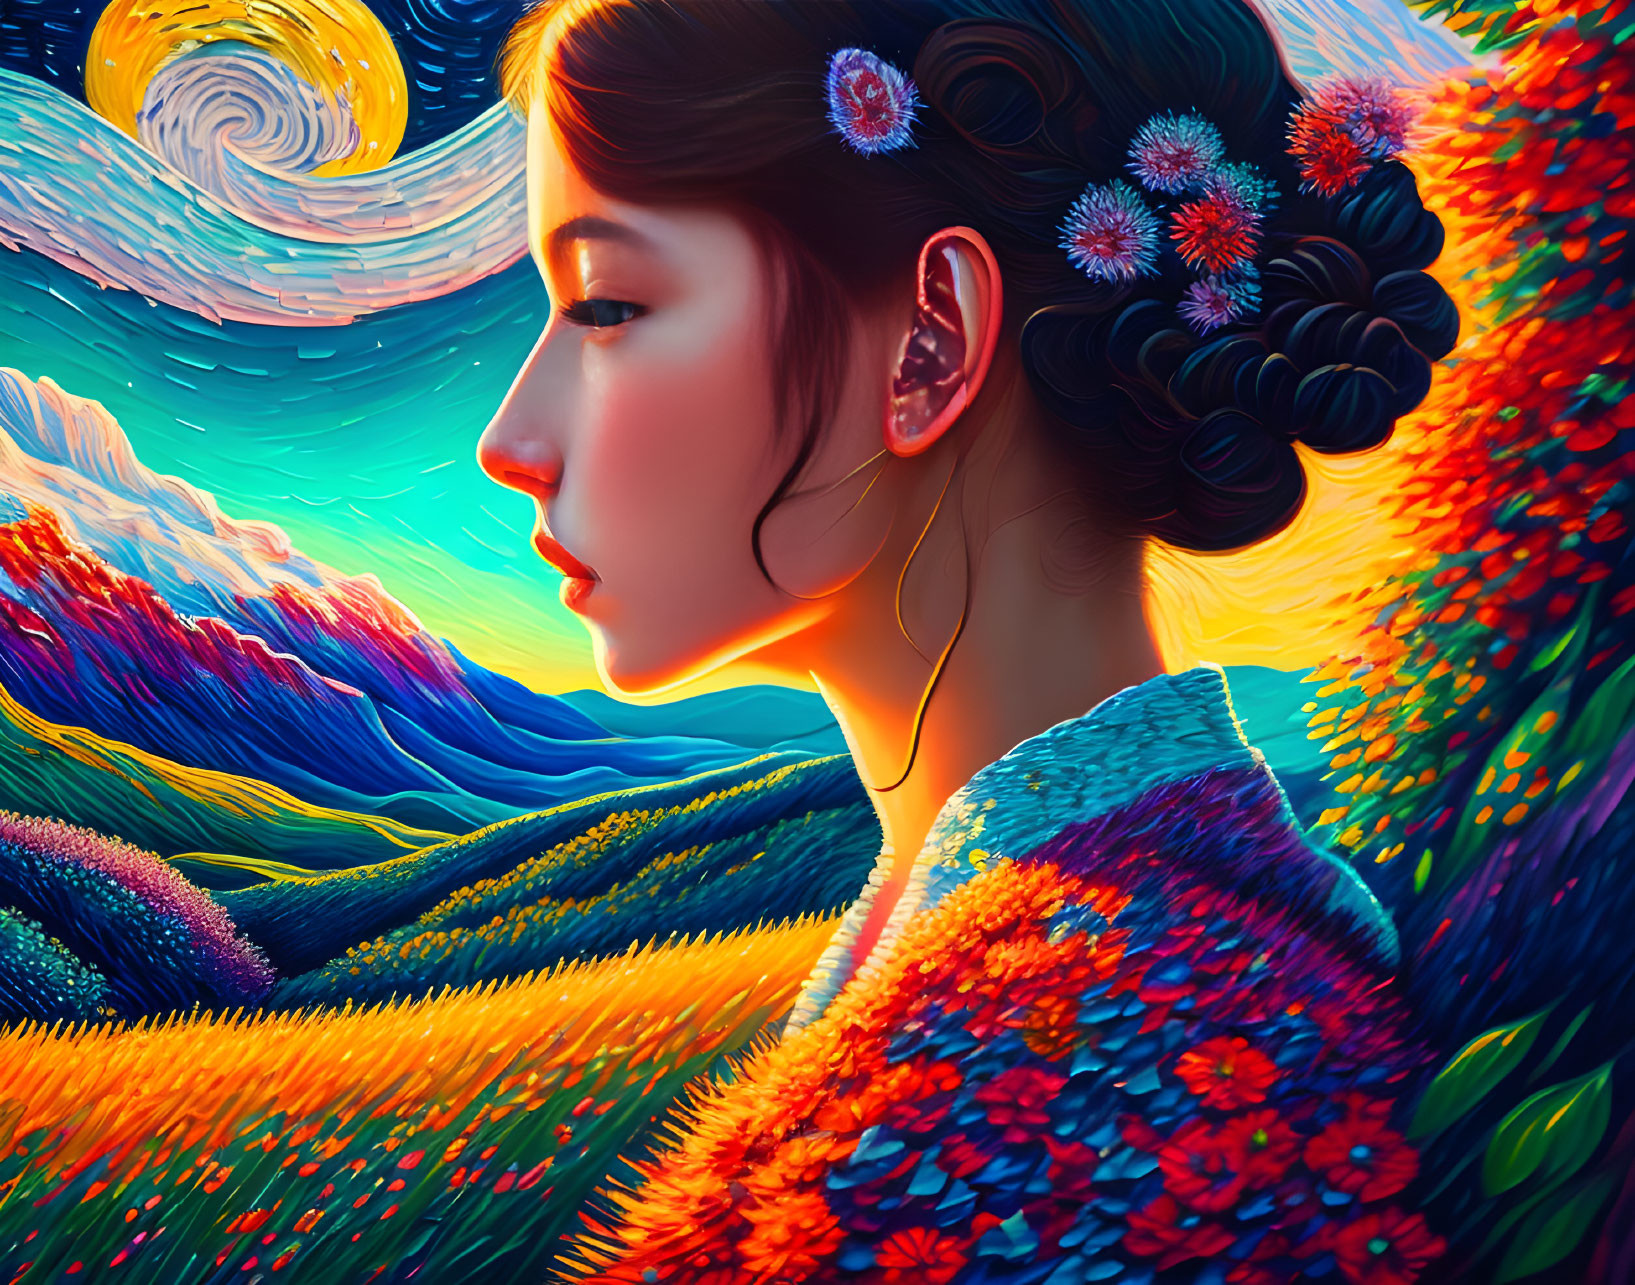 Woman with decorative flowers in hair against swirling landscape reminiscent of Van Gogh.